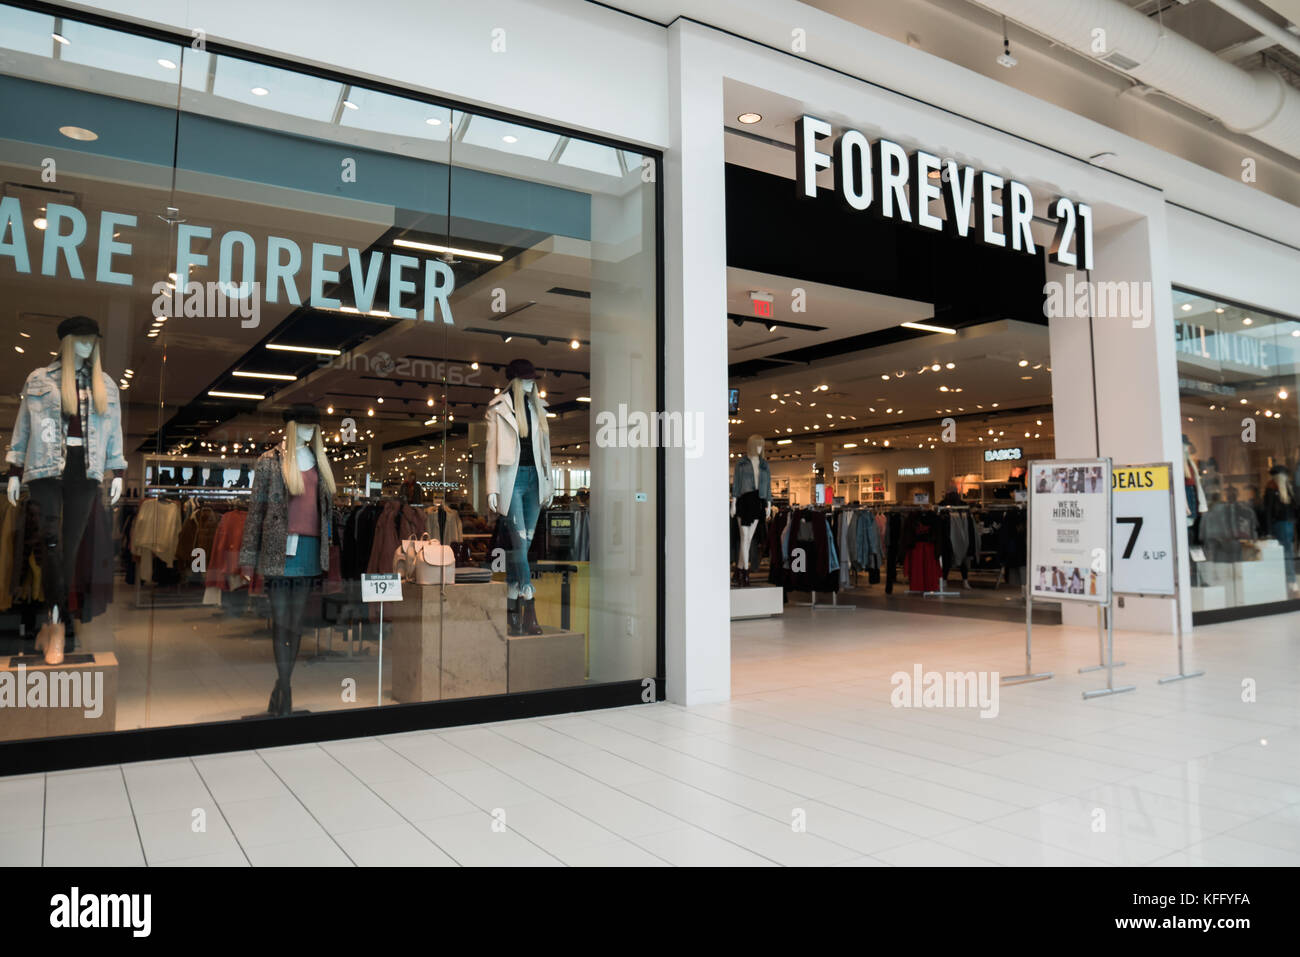 forever 21 store Stock Photo - Alamy